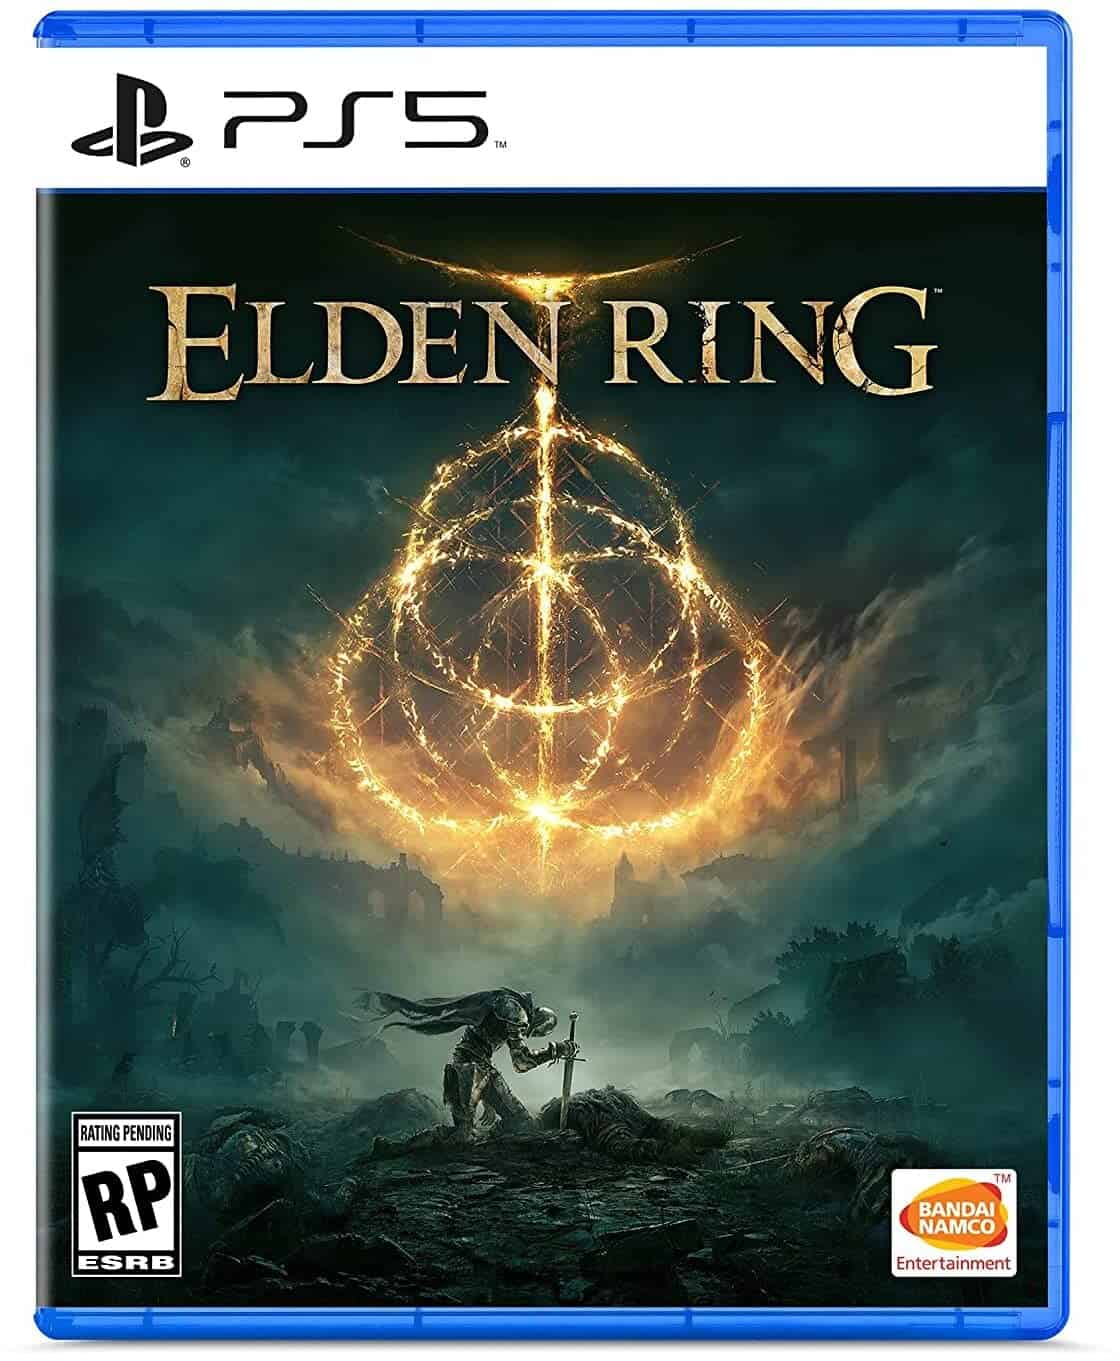 Elden Ring - Download for PC Free